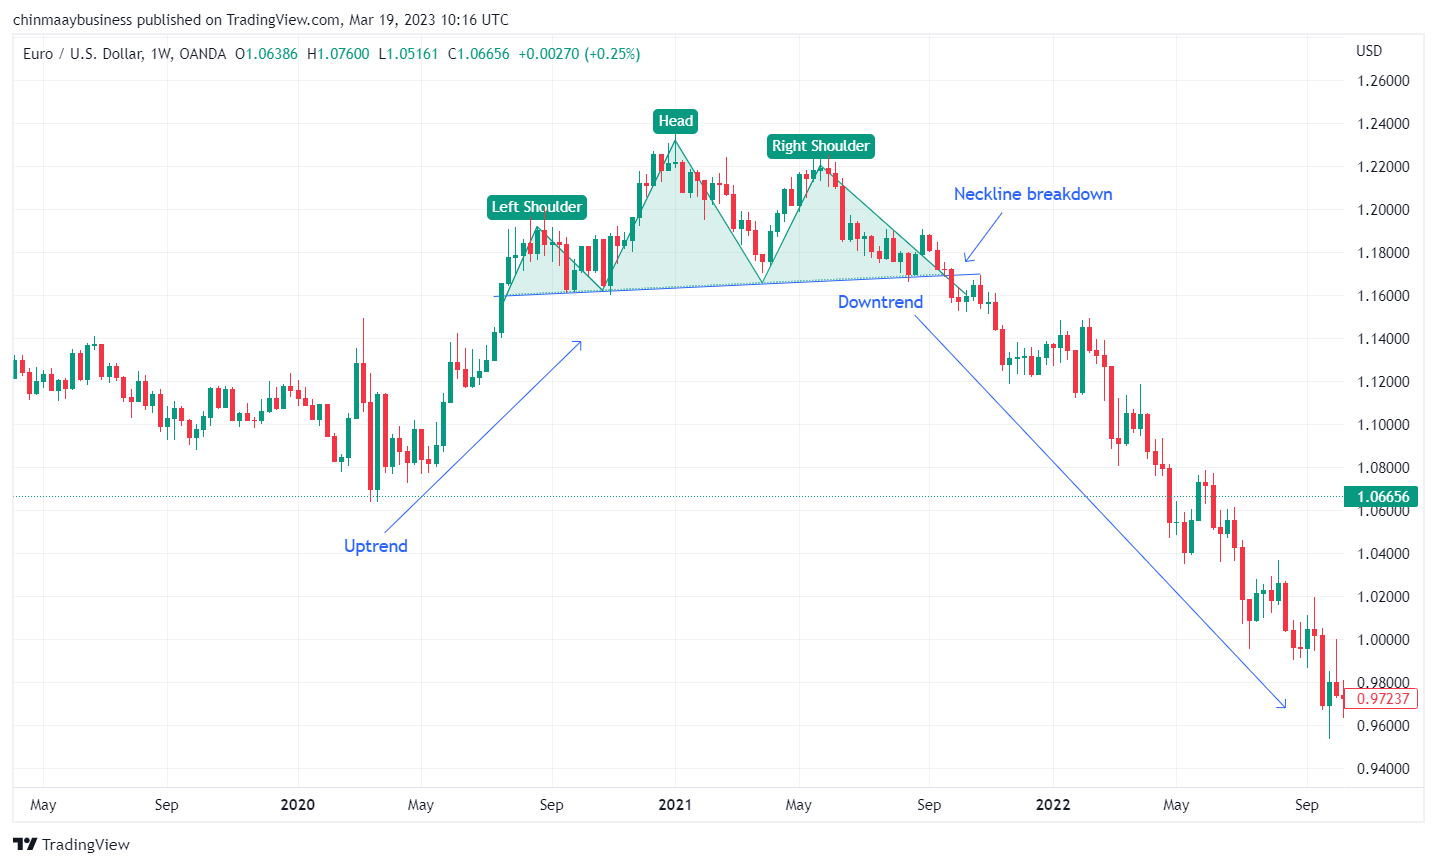 Head and Shoulders pattern